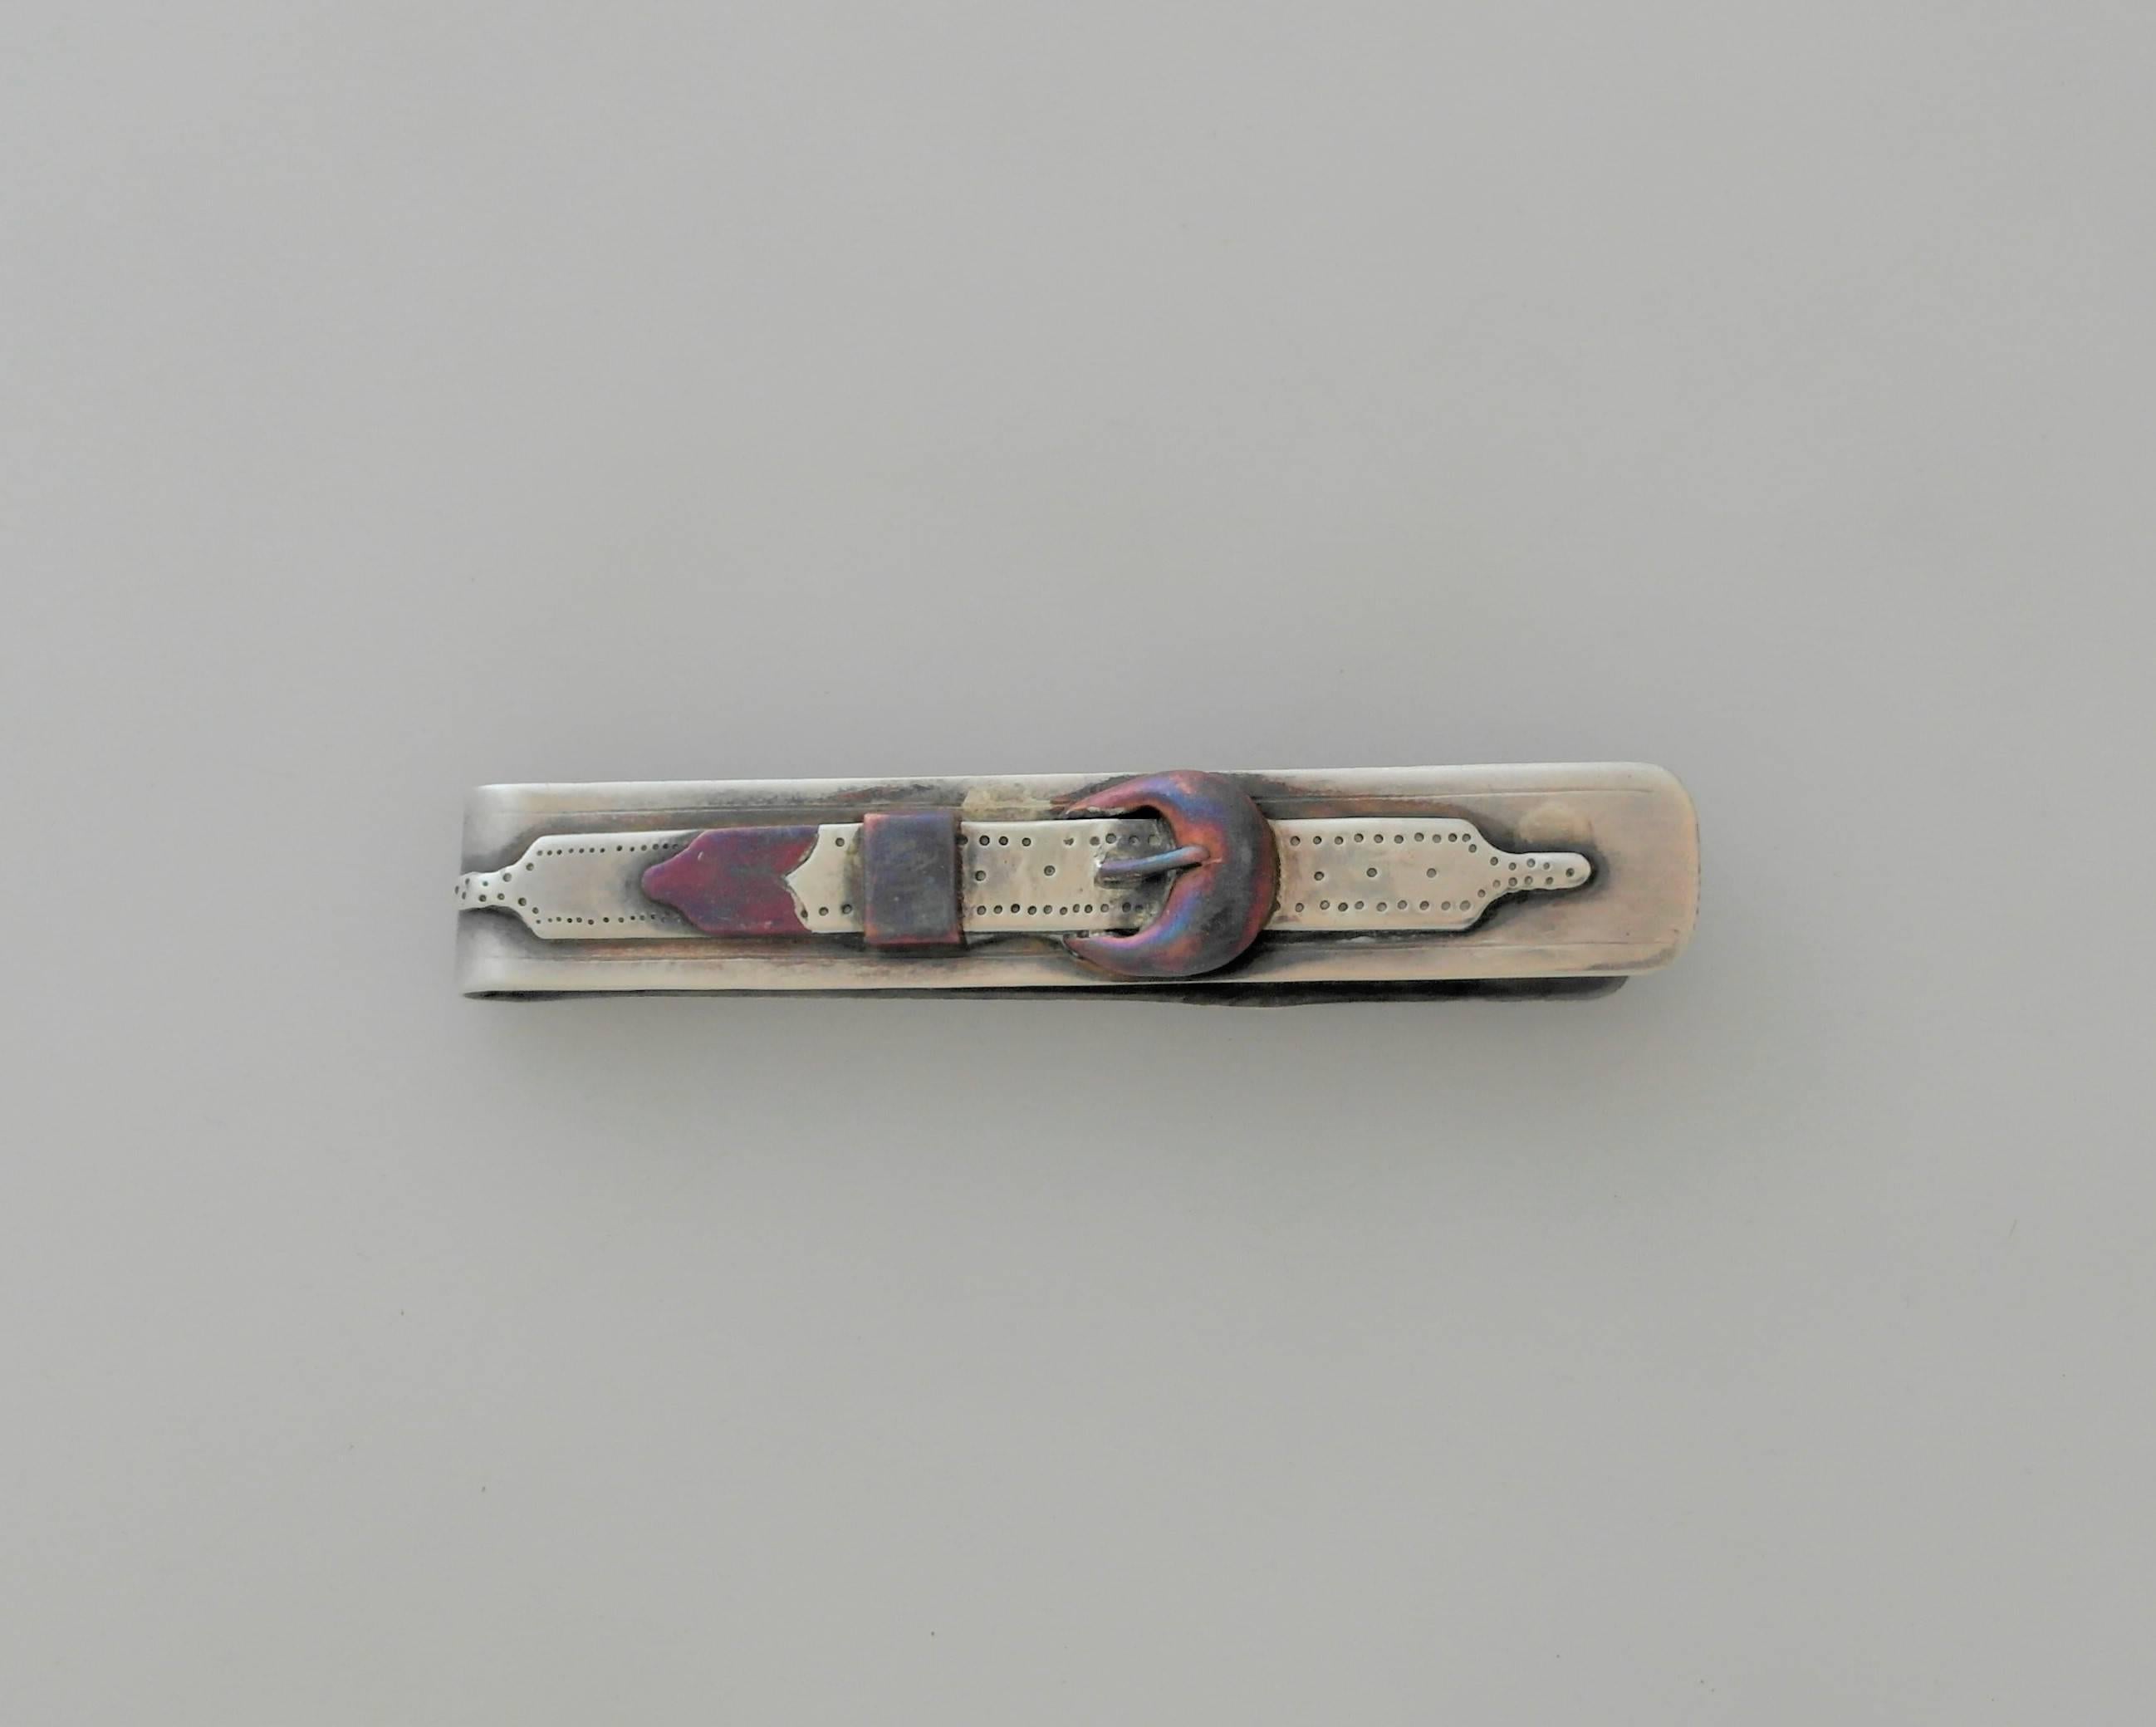 Being offered is a sterling silver money clip made by Antonio Pineda of Taxco, Mexico. Designed in the form of a belt with a copper accented belt buckle. Dimensions: 3 inches long by 1/2 inch wide. Marked as illustrated. In excellent condition.
